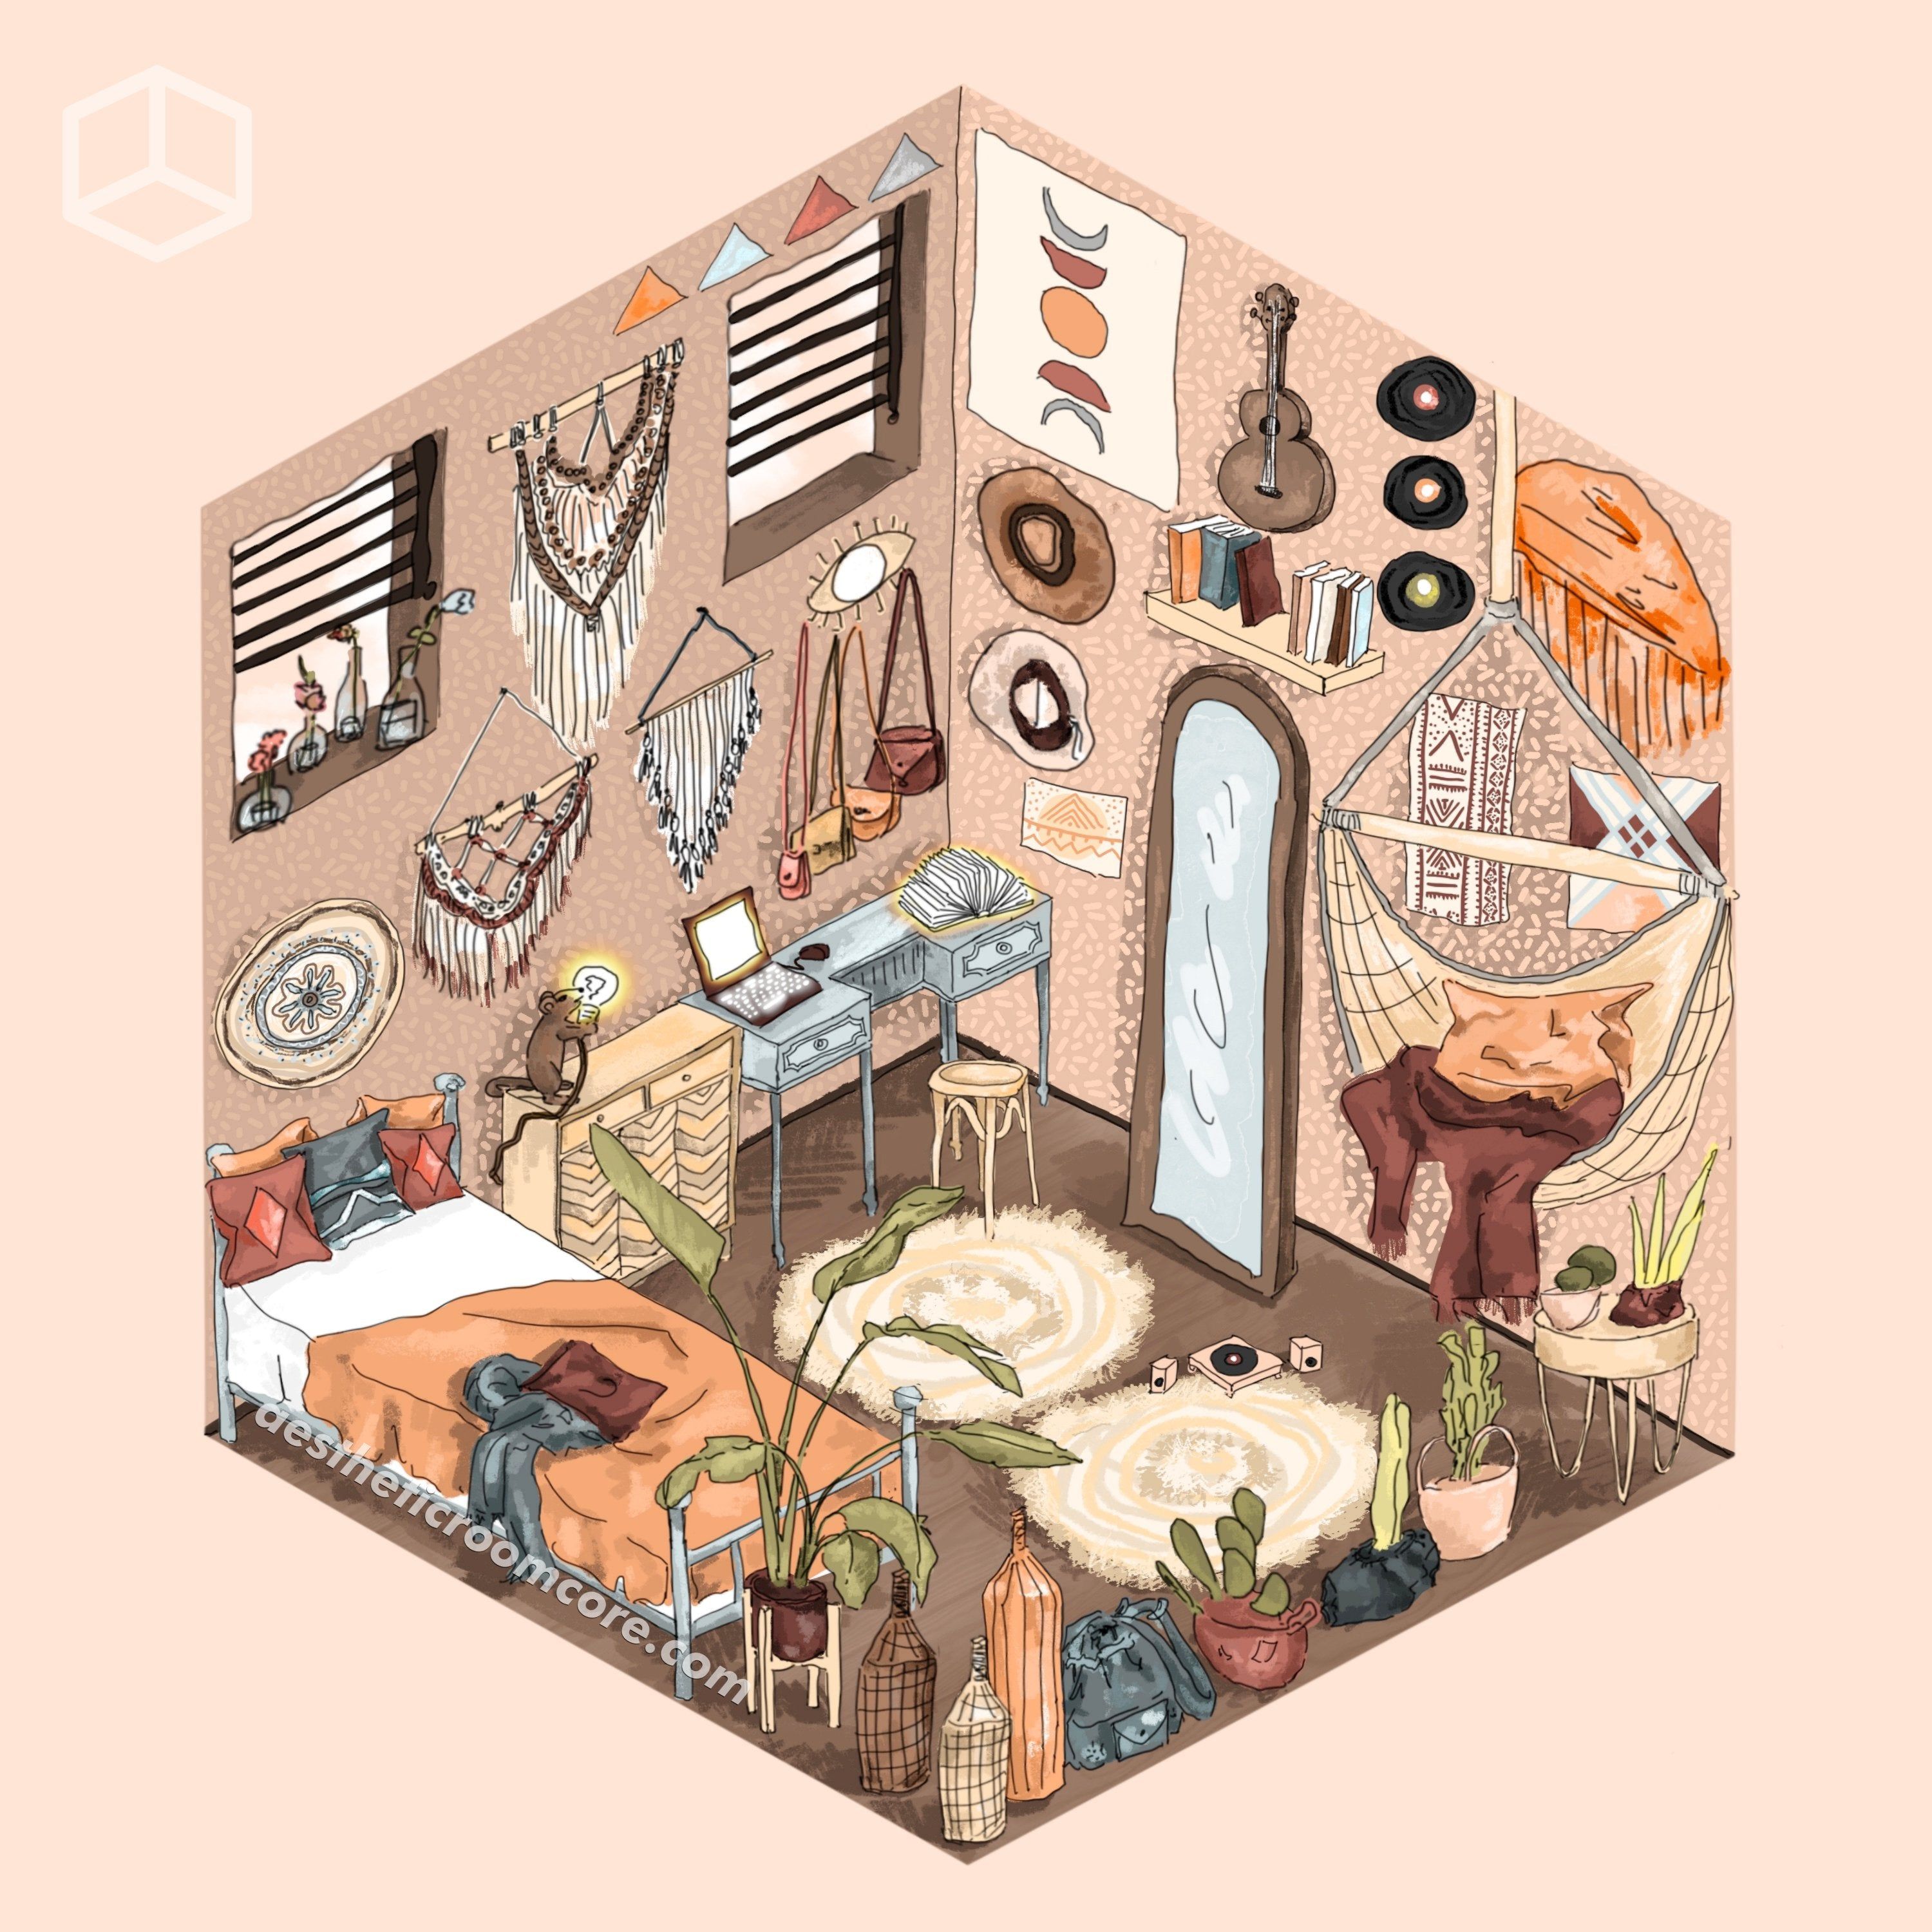 A cozy boho-chic room with a vanity, hammock chair, and record collection. The walls are adorned with macrame, and there's a cute cat in the room. - Witchcore